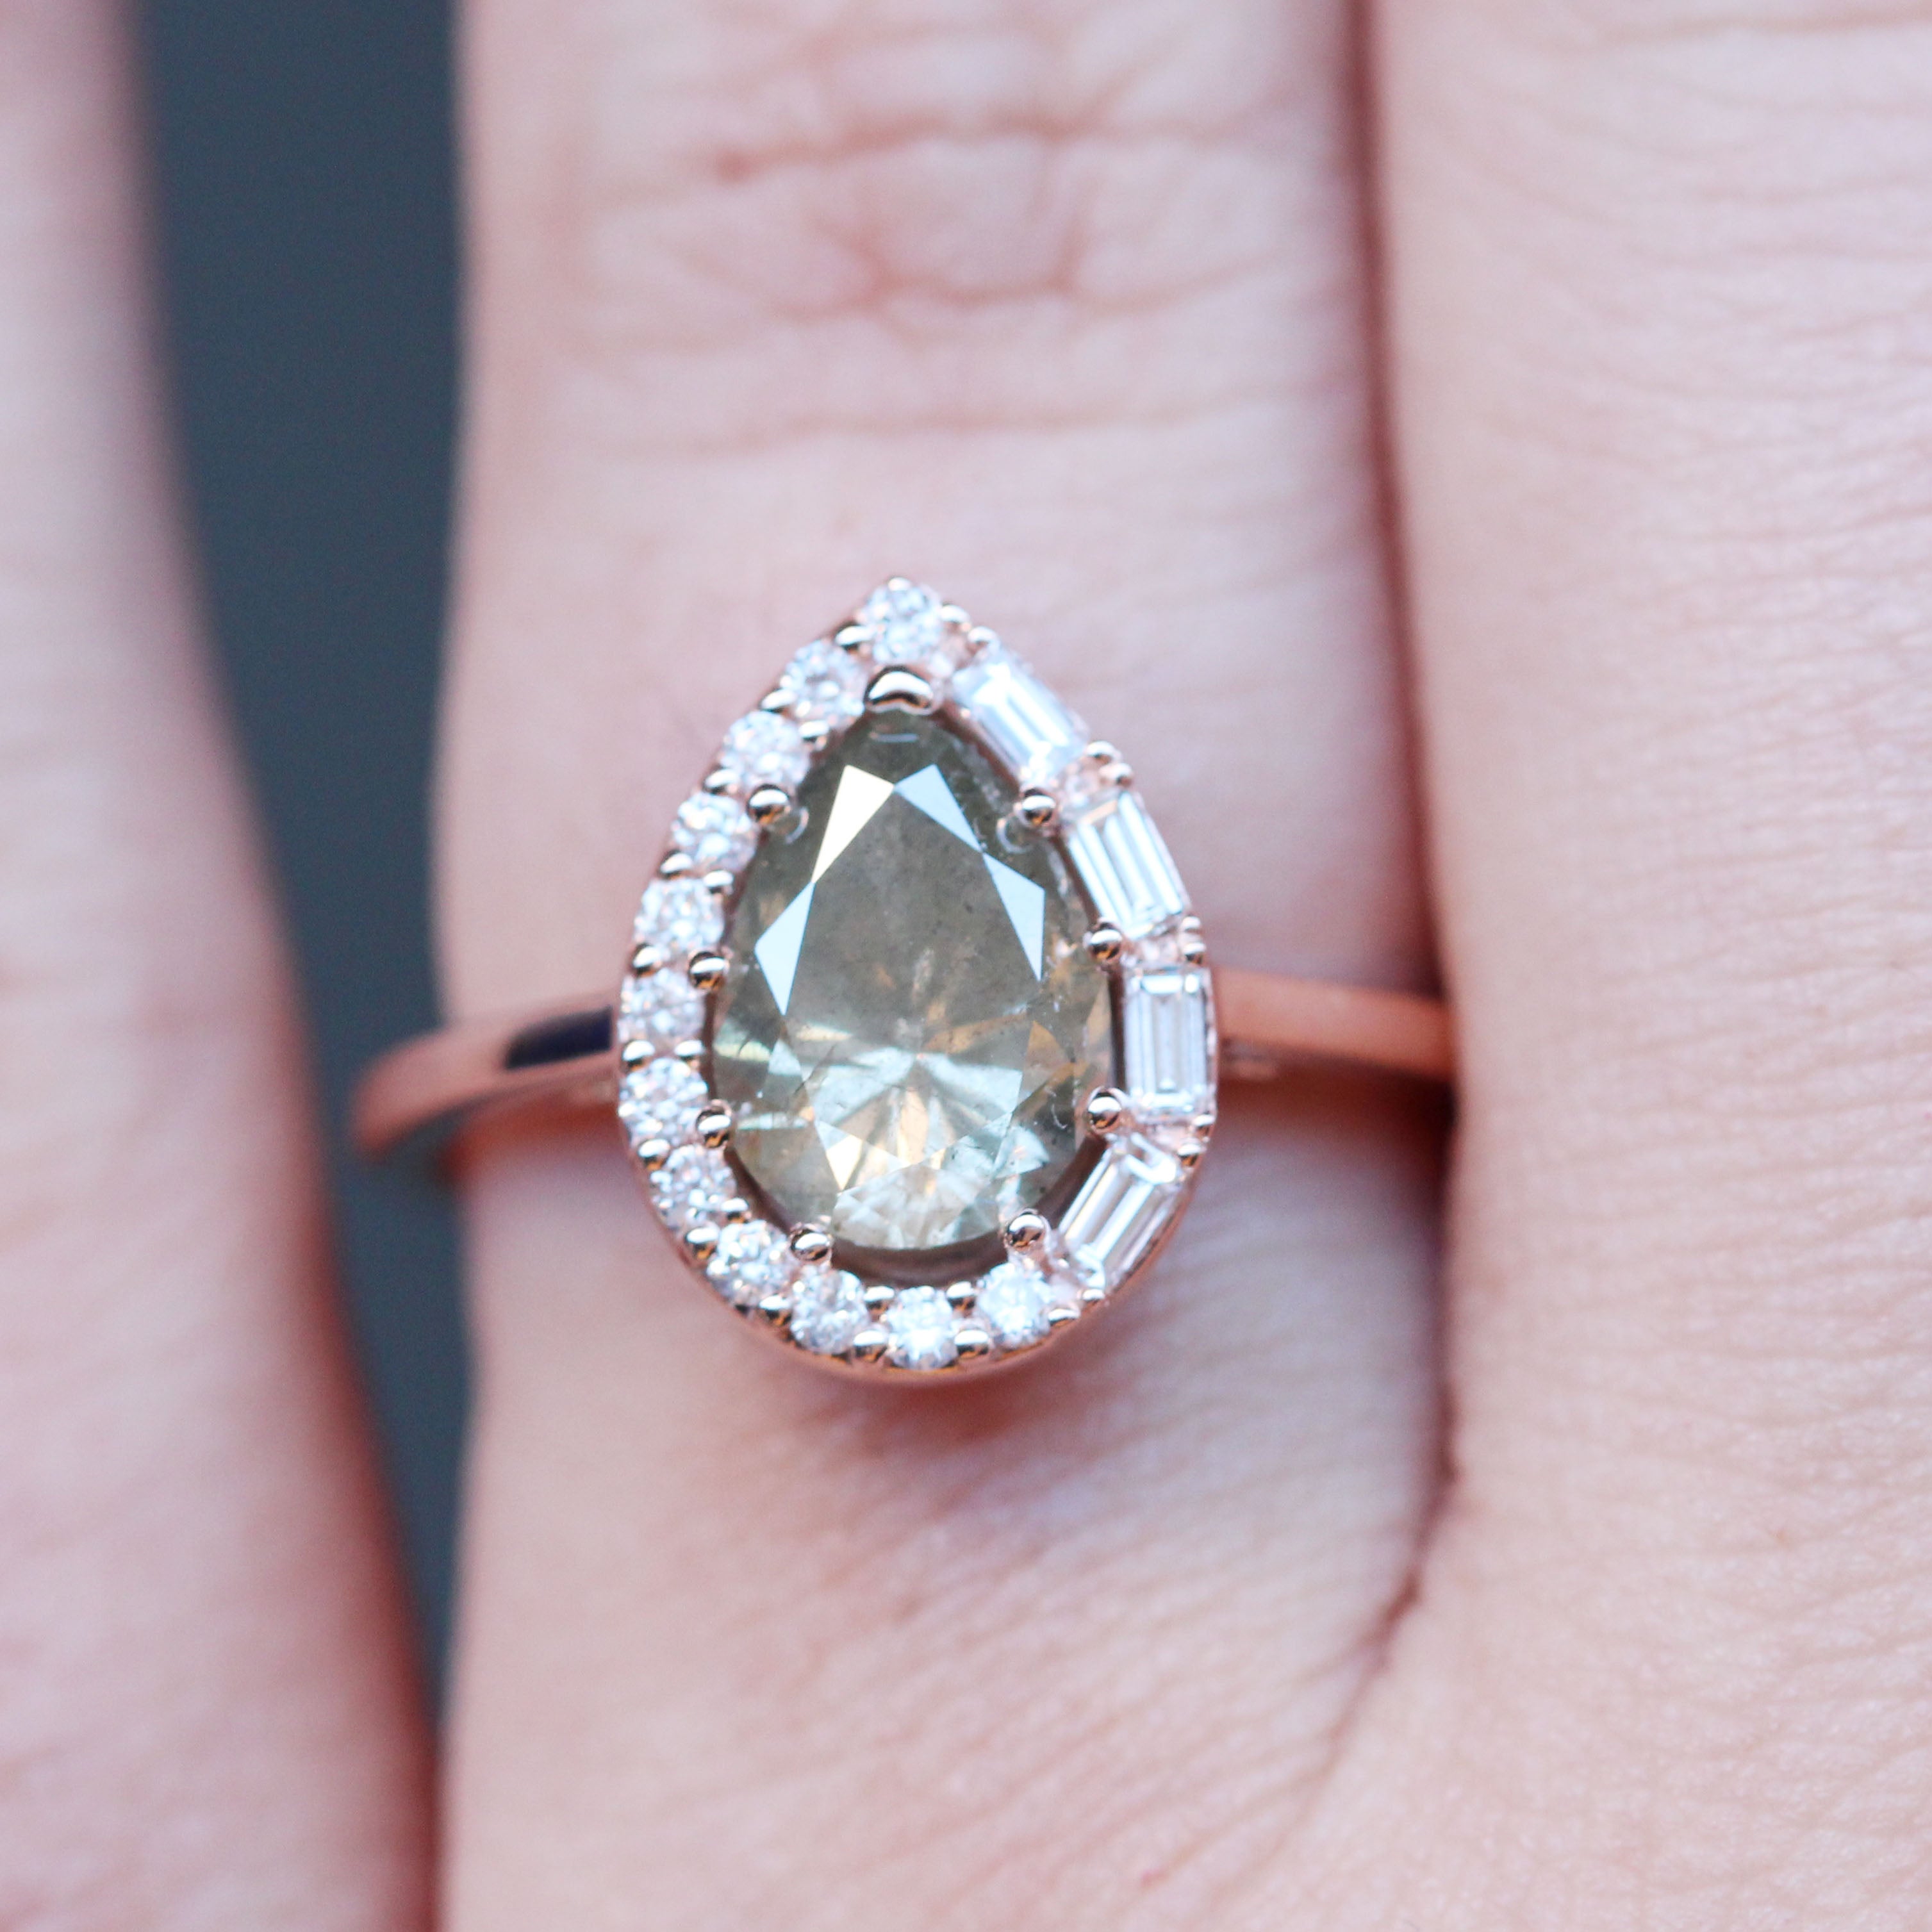 Collins Ring with a 1.69 Green + Gray Pear Diamond and White Accent Diamonds in 10k Rose Gold - Ready to Size and Ship - Midwinter Co. Alternative Bridal Rings and Modern Fine Jewelry